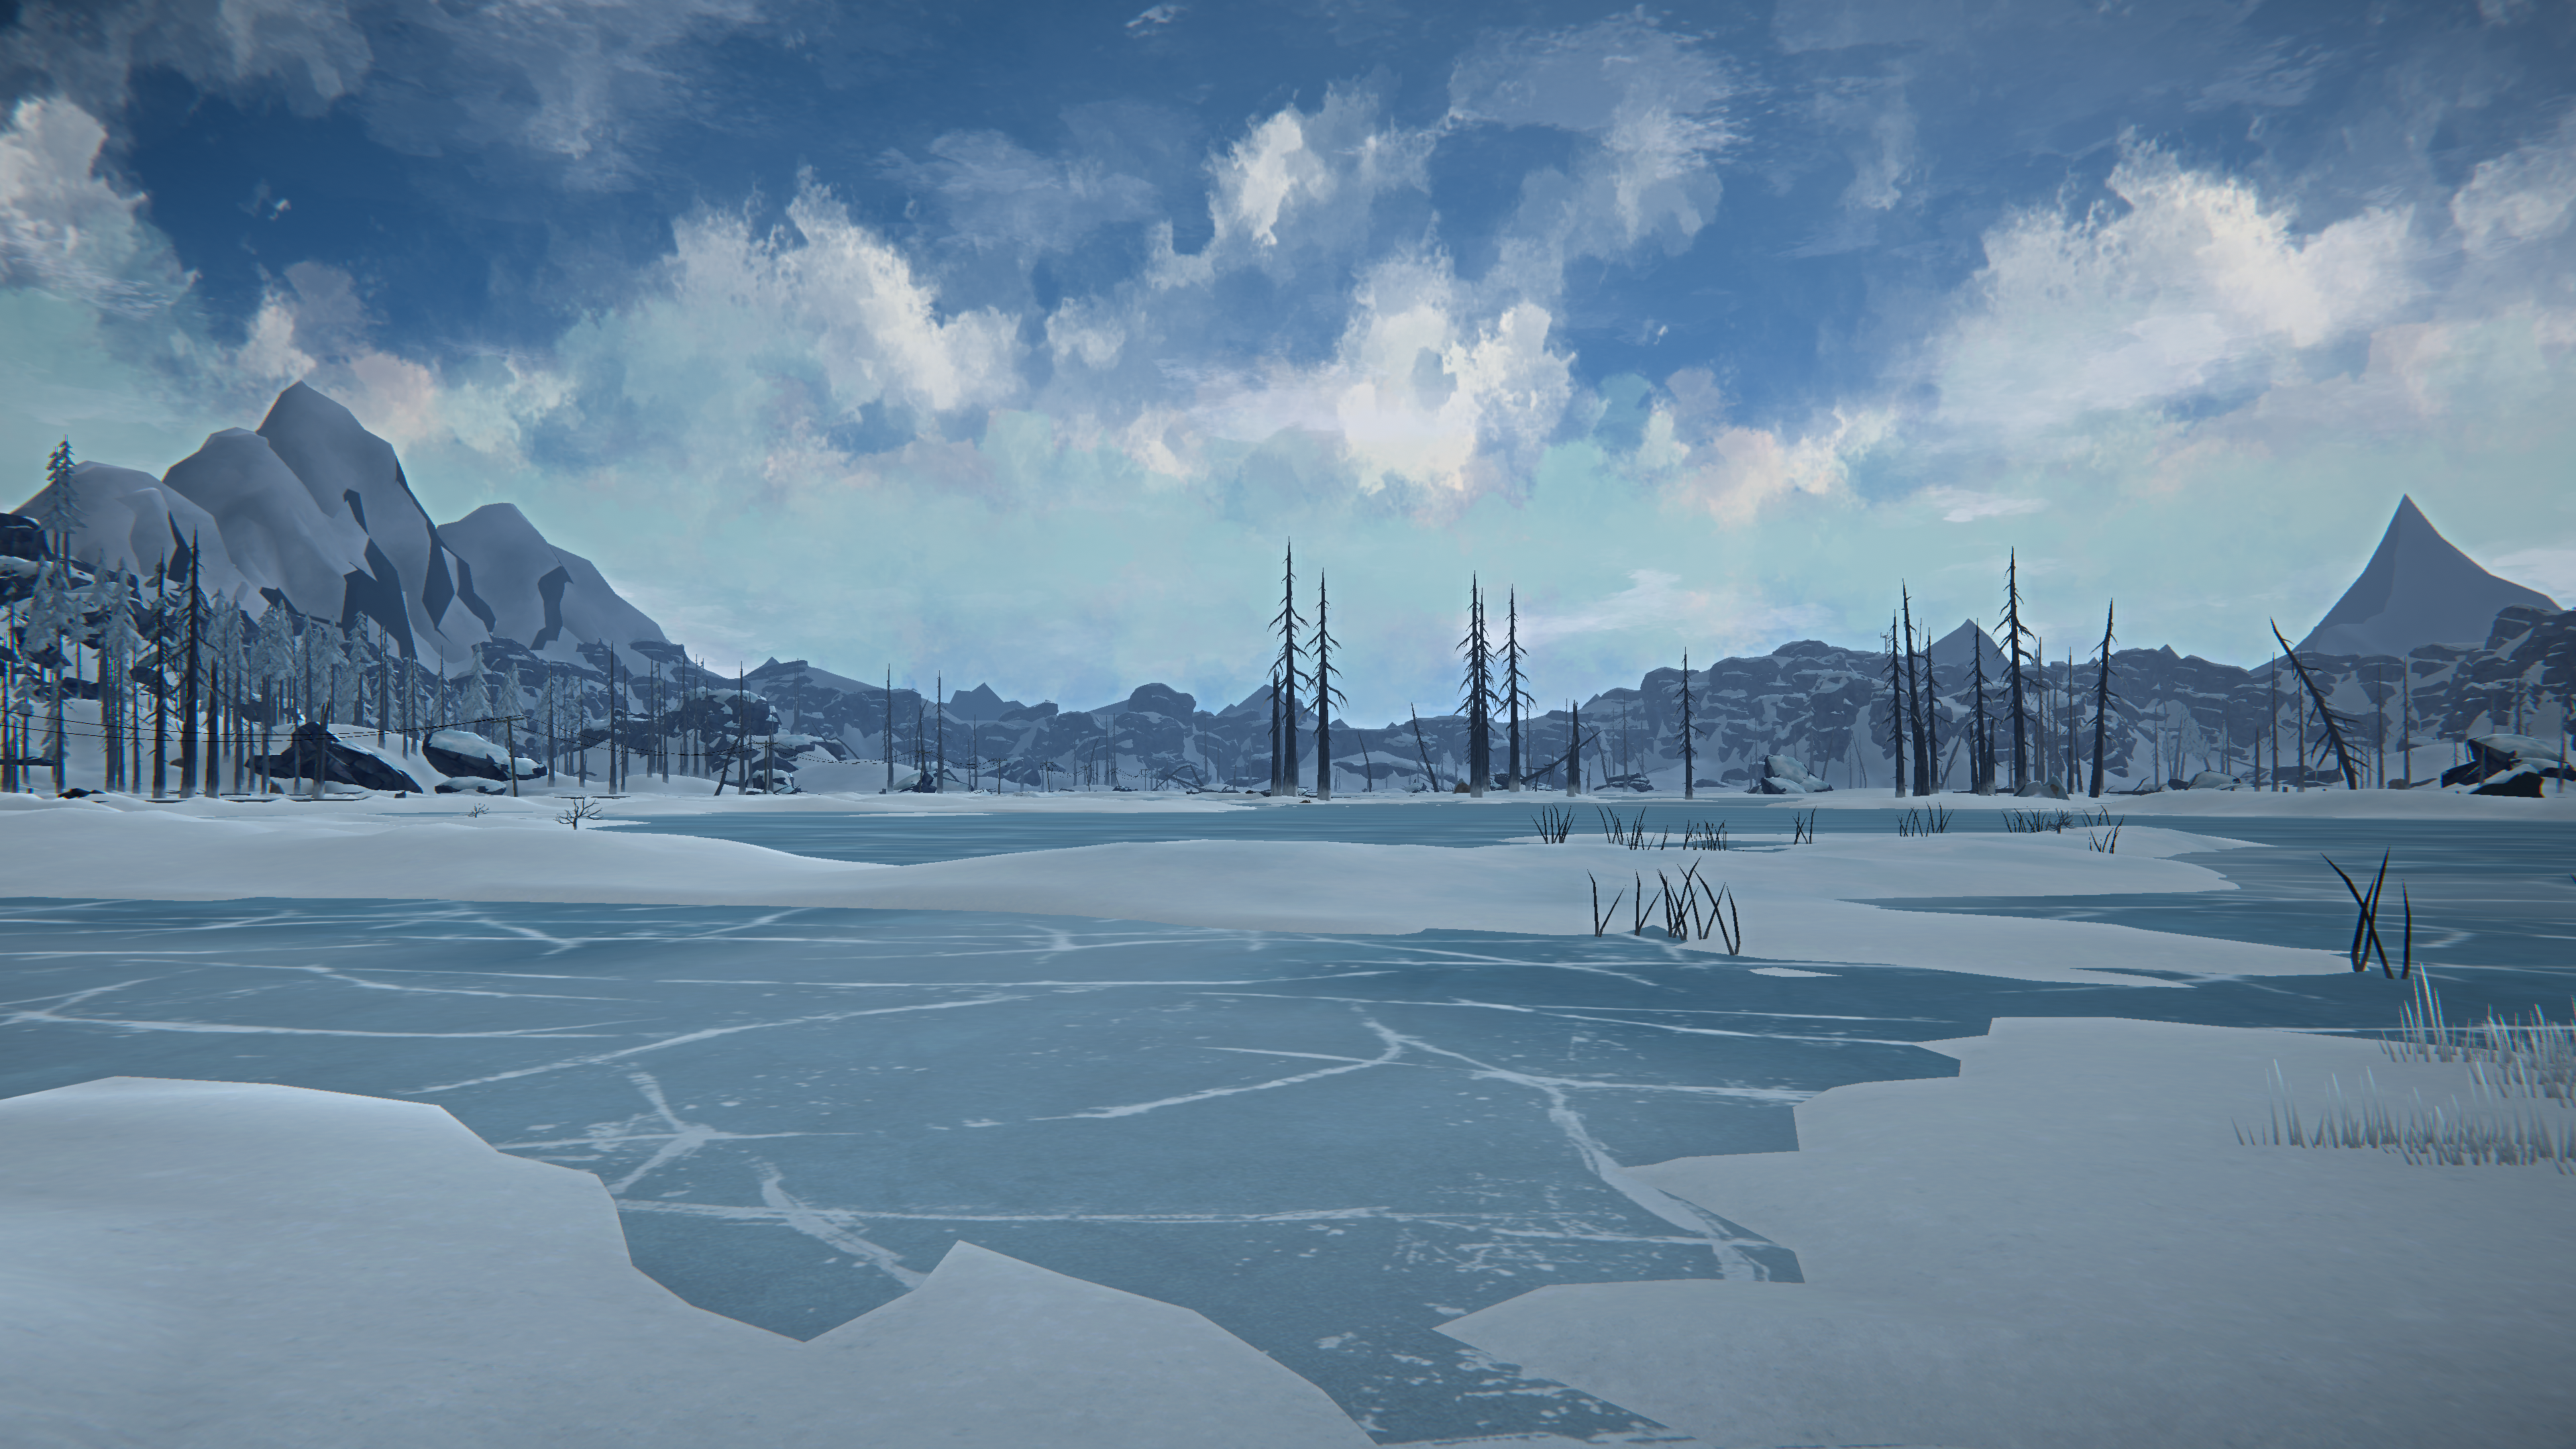 Video Game Landscape Video Games Screen Shot The Long Dark Snow PC Gaming Survival Video Game Art Na 3840x2160